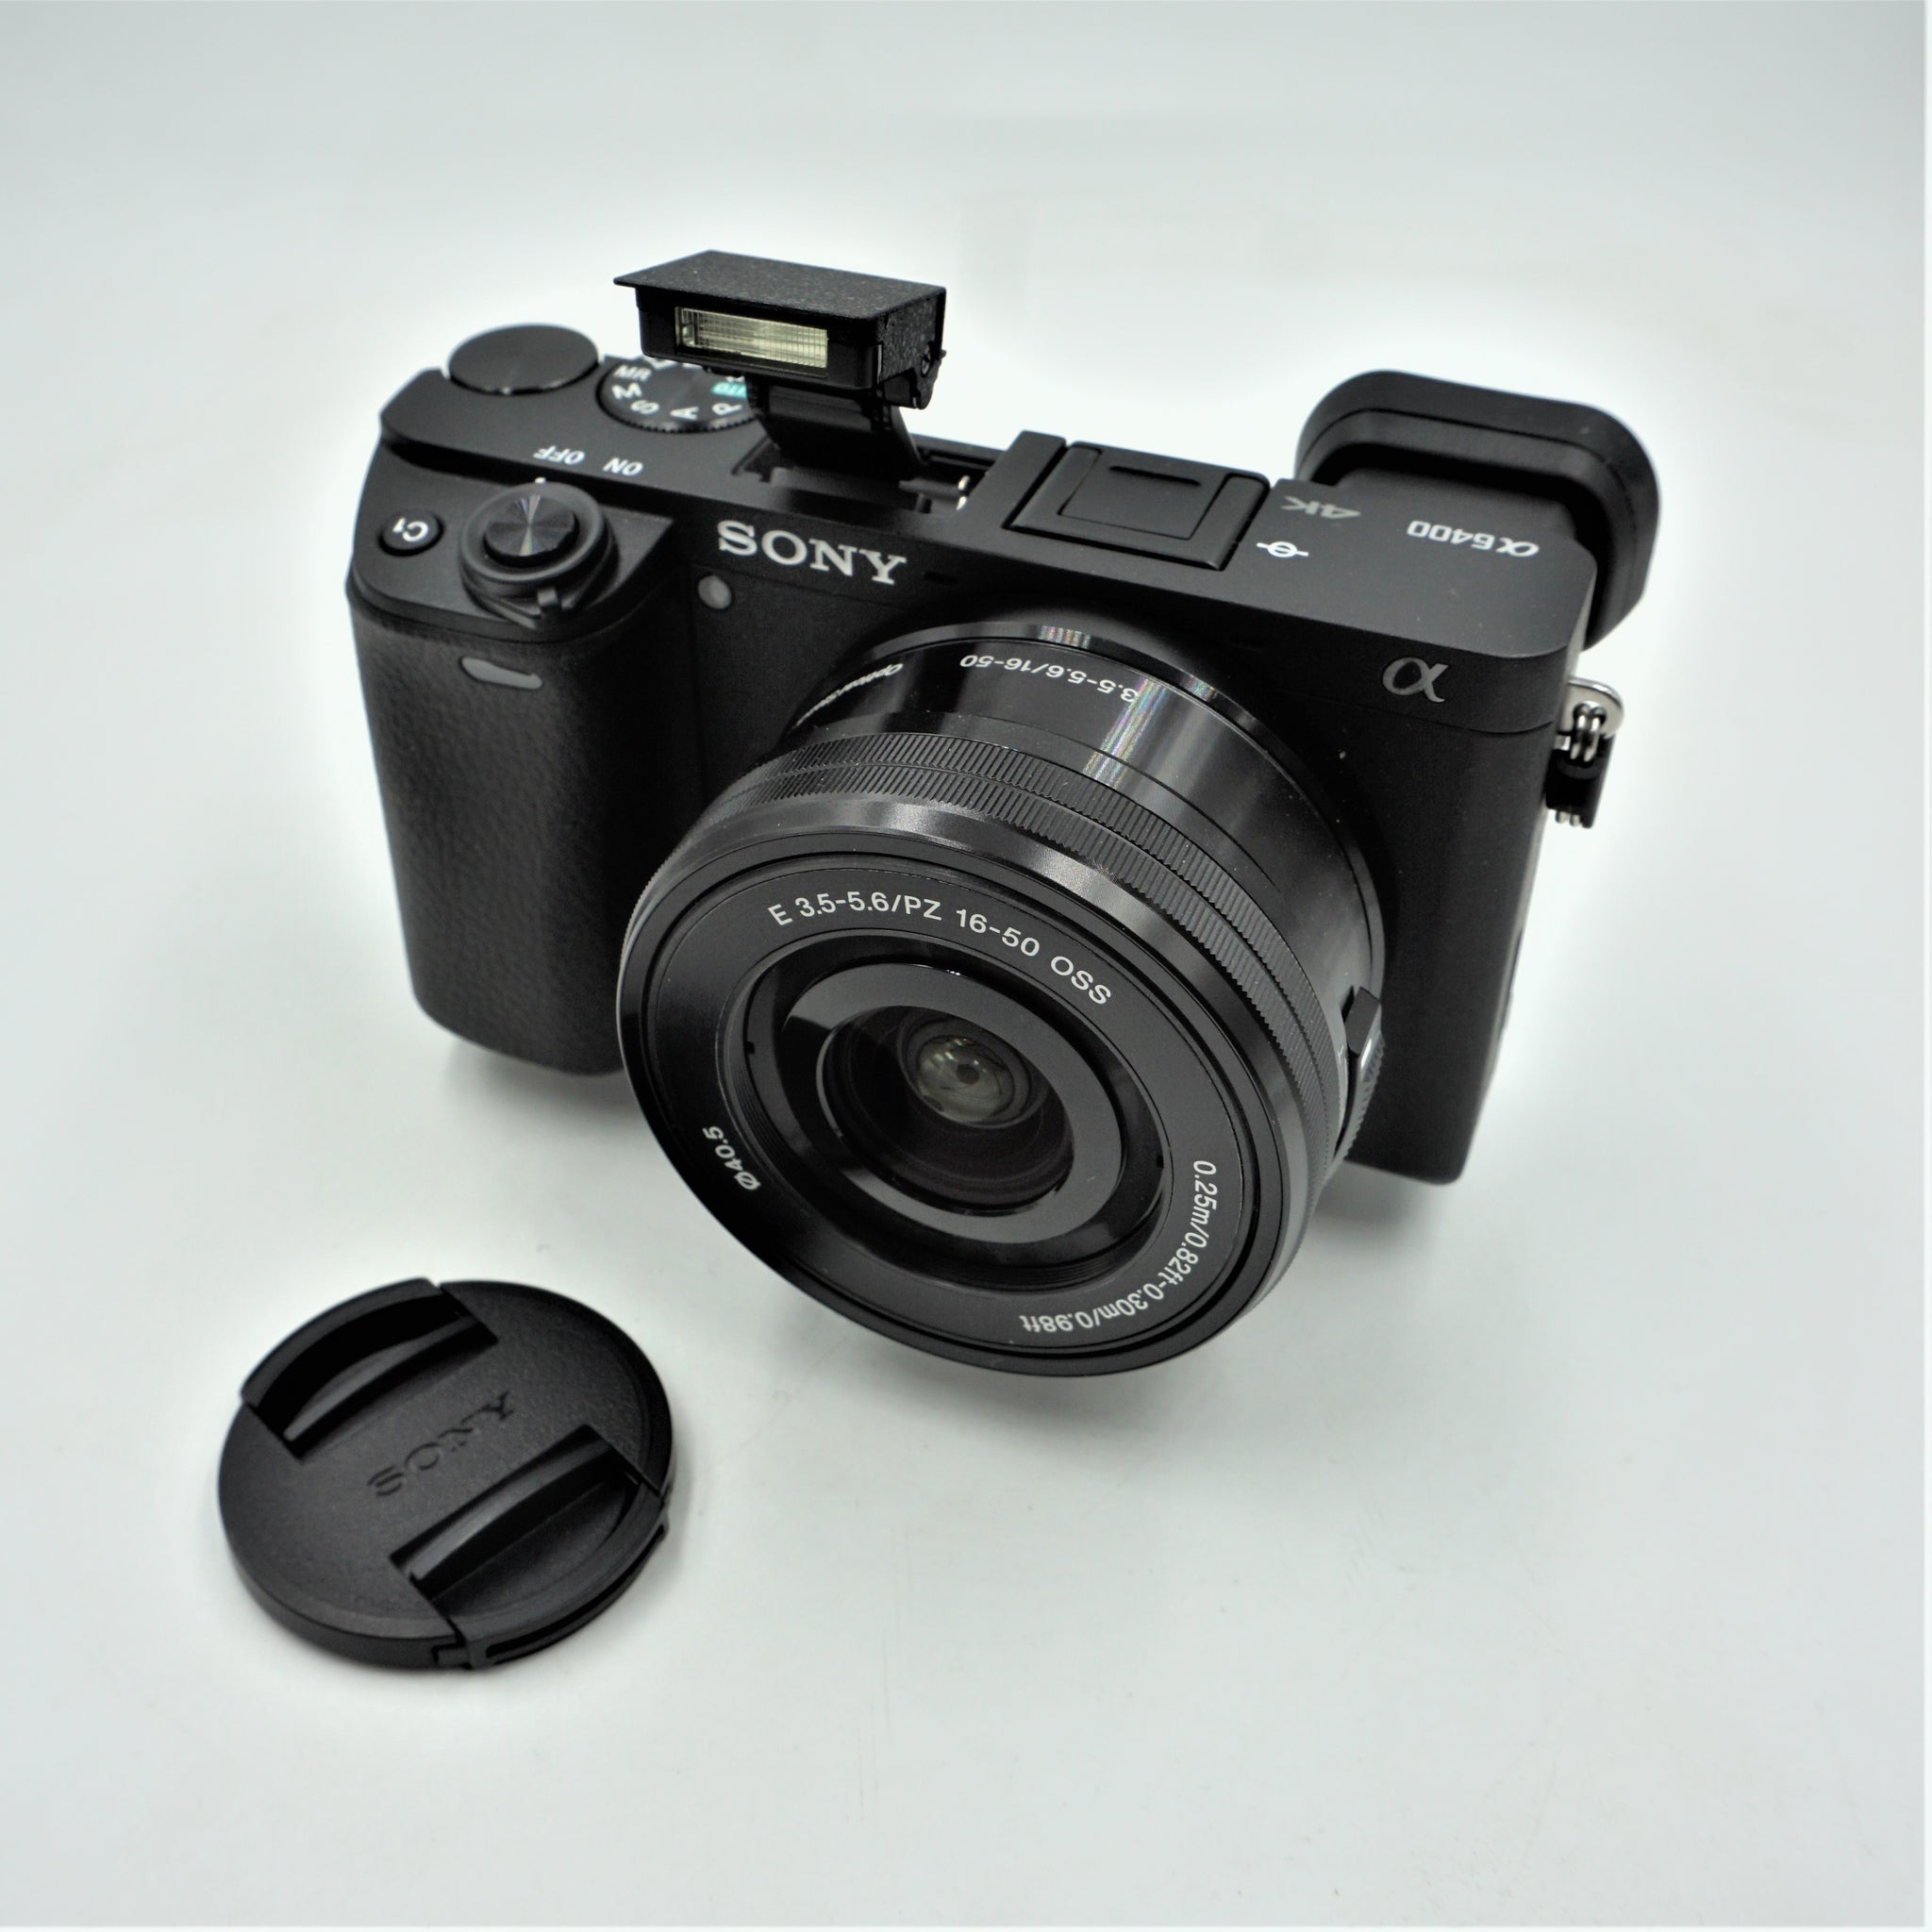 Sony Alpha a6400 Mirrorless Digital Camera with 16-50mm Lens ILCE